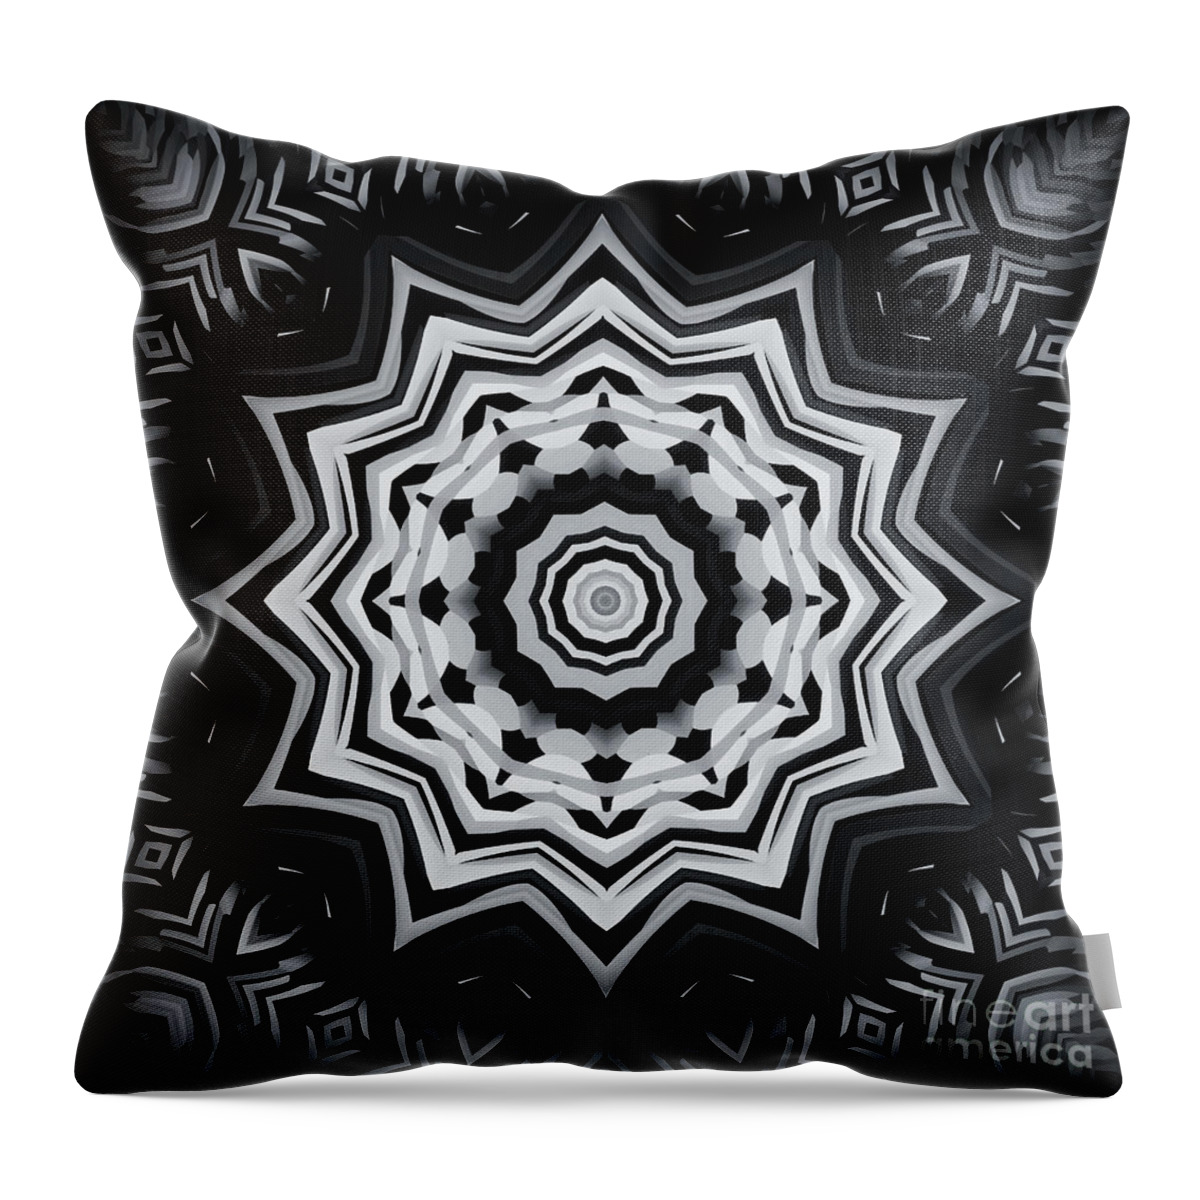 Black And White Throw Pillow featuring the digital art Don't Blink by Rachel Hannah